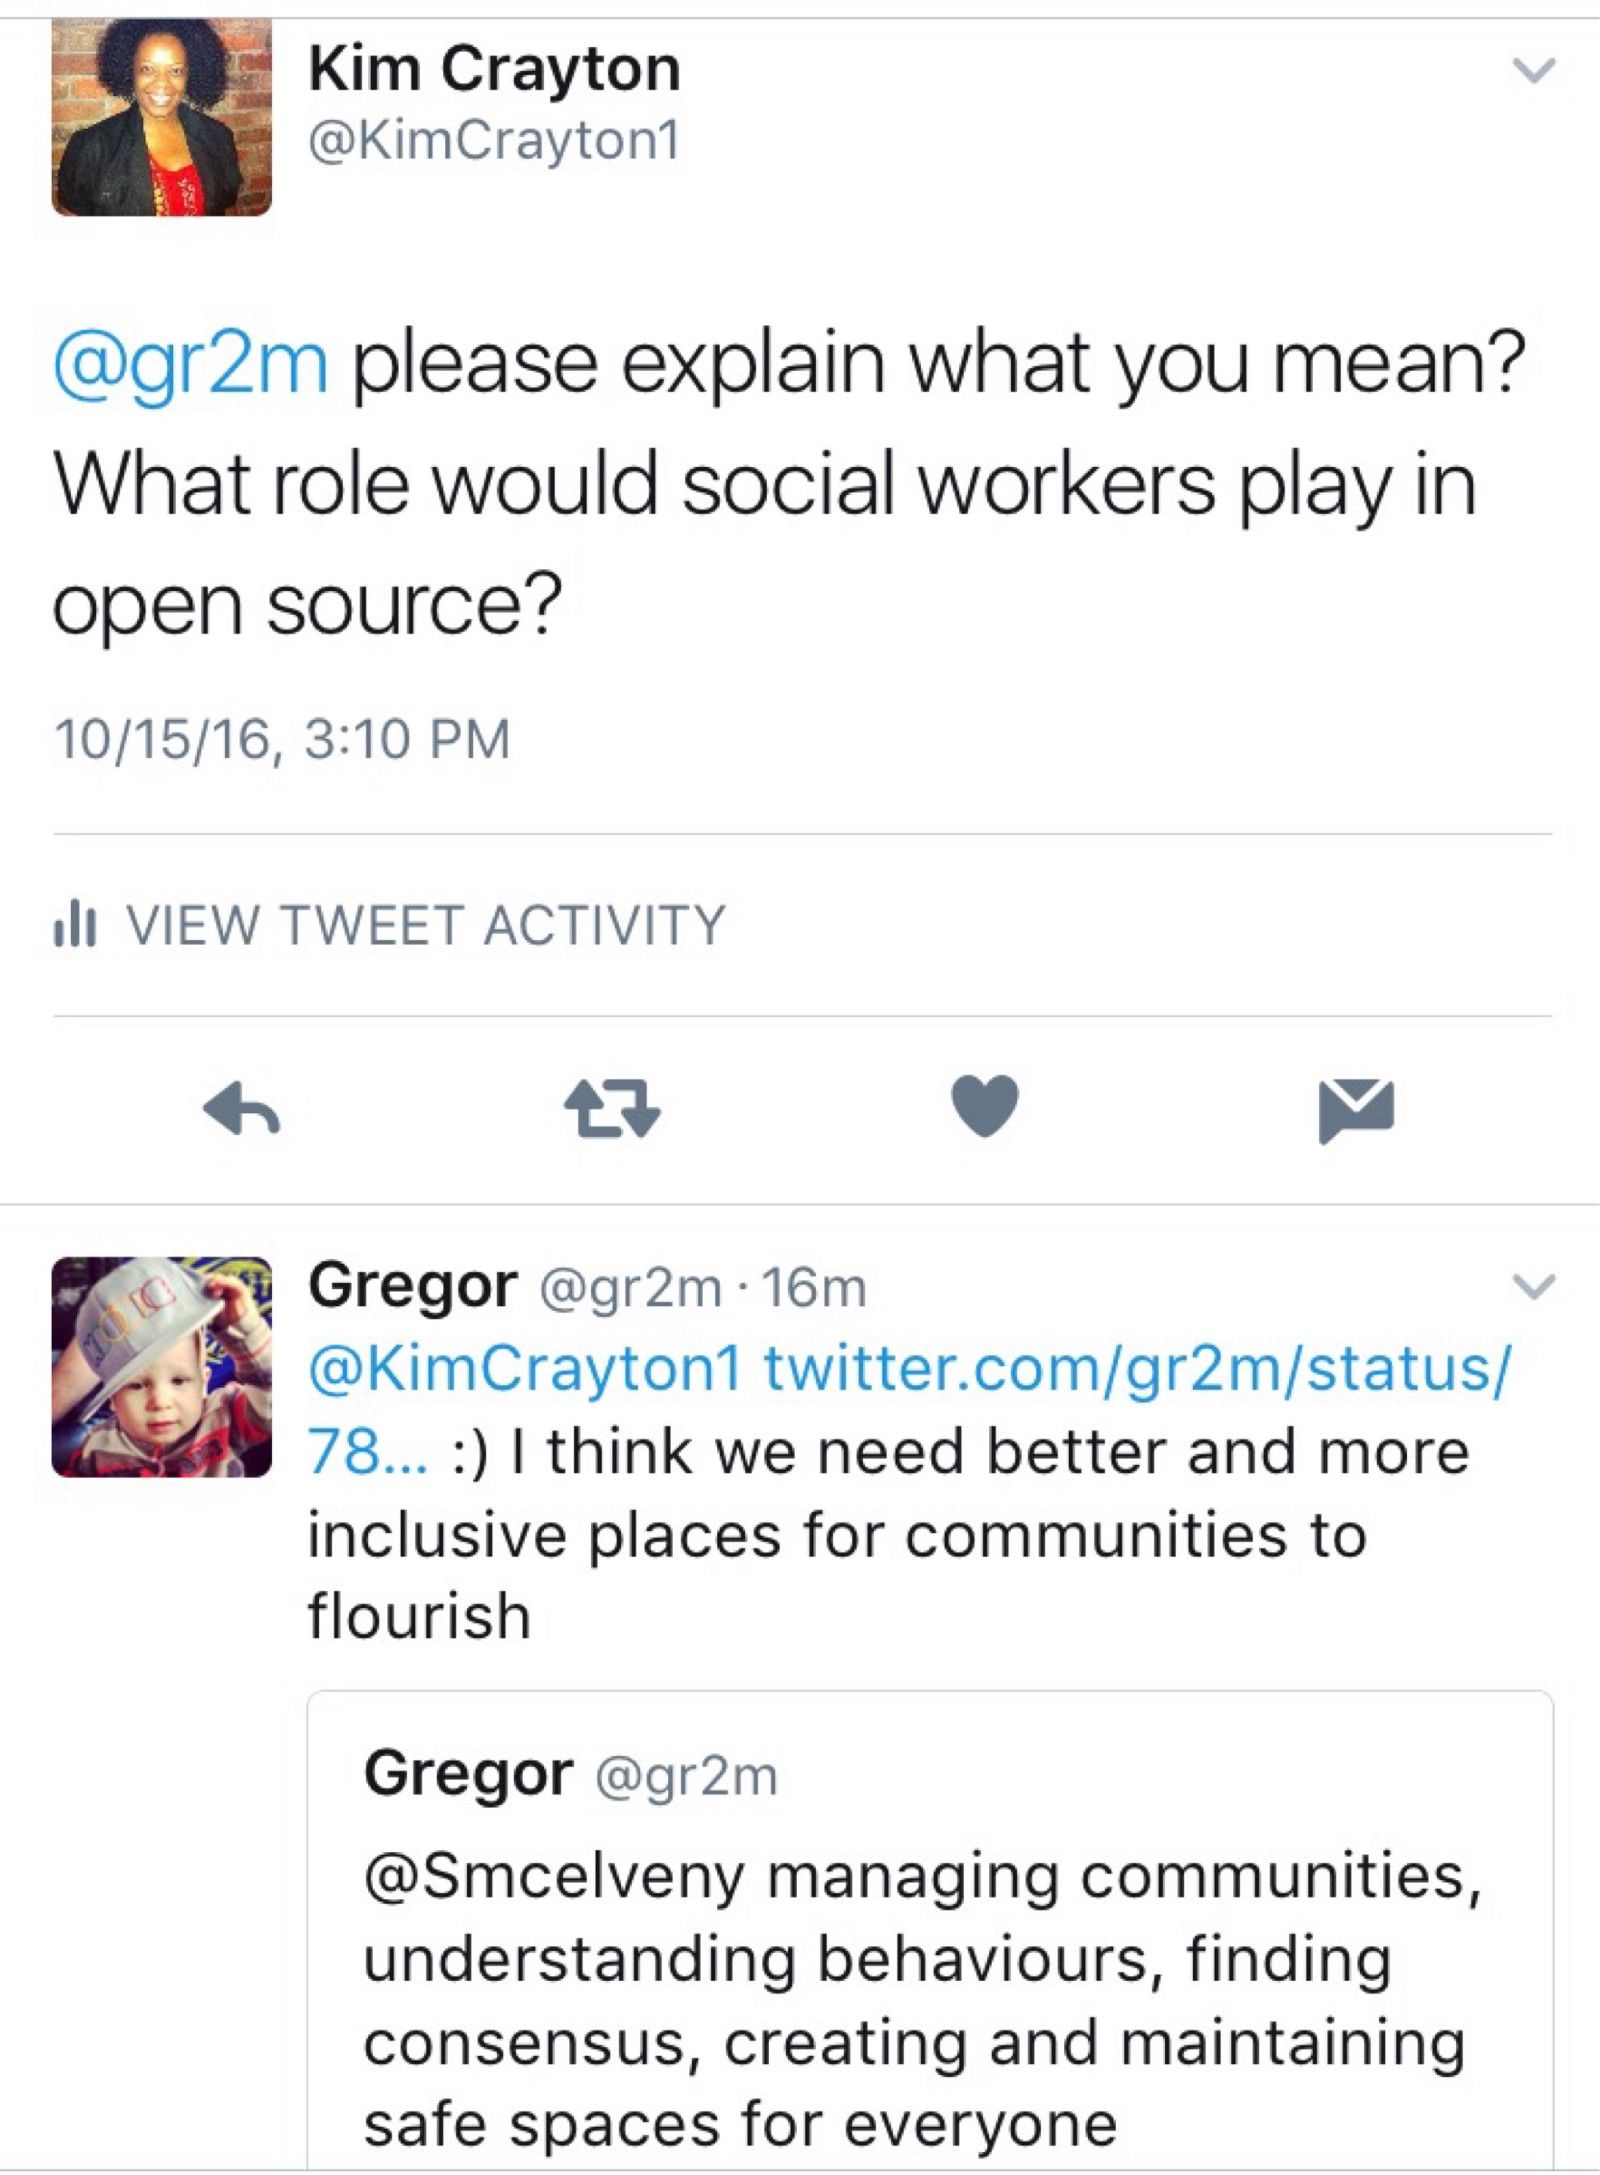 Twitter thread with @KimCrayton1 asking @gr2m for clarification and @gr2m responding with "I think we need better more inclusive places for communities to flourish